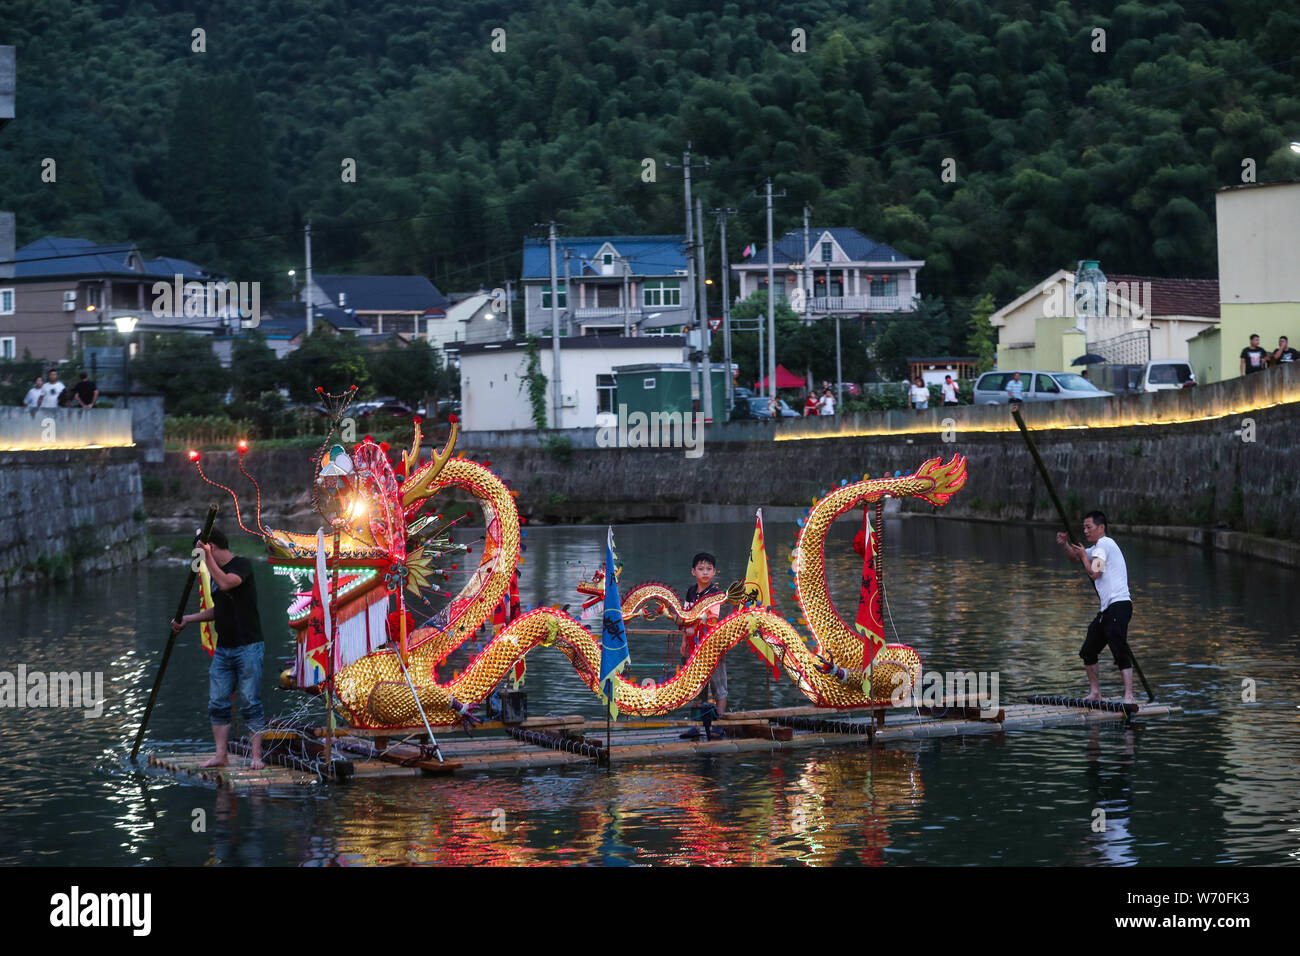 Hangzhou, Hangzhou City of east China's Zhejiang Province. 3rd Aug, 2019. Villagers display dragon lantern during the coolness party in Changlyu Town, Hangzhou City of east China's Zhejiang Province, Aug. 3, 2019. A coolness party was held here in Changlyu Town on Saturday, during which people could enjoy the coolness in summer through various activities such as evening gala, fruit picking, basketball game and handicrafts making. Credit: Xu Yu/Xinhua/Alamy Live News Stock Photo